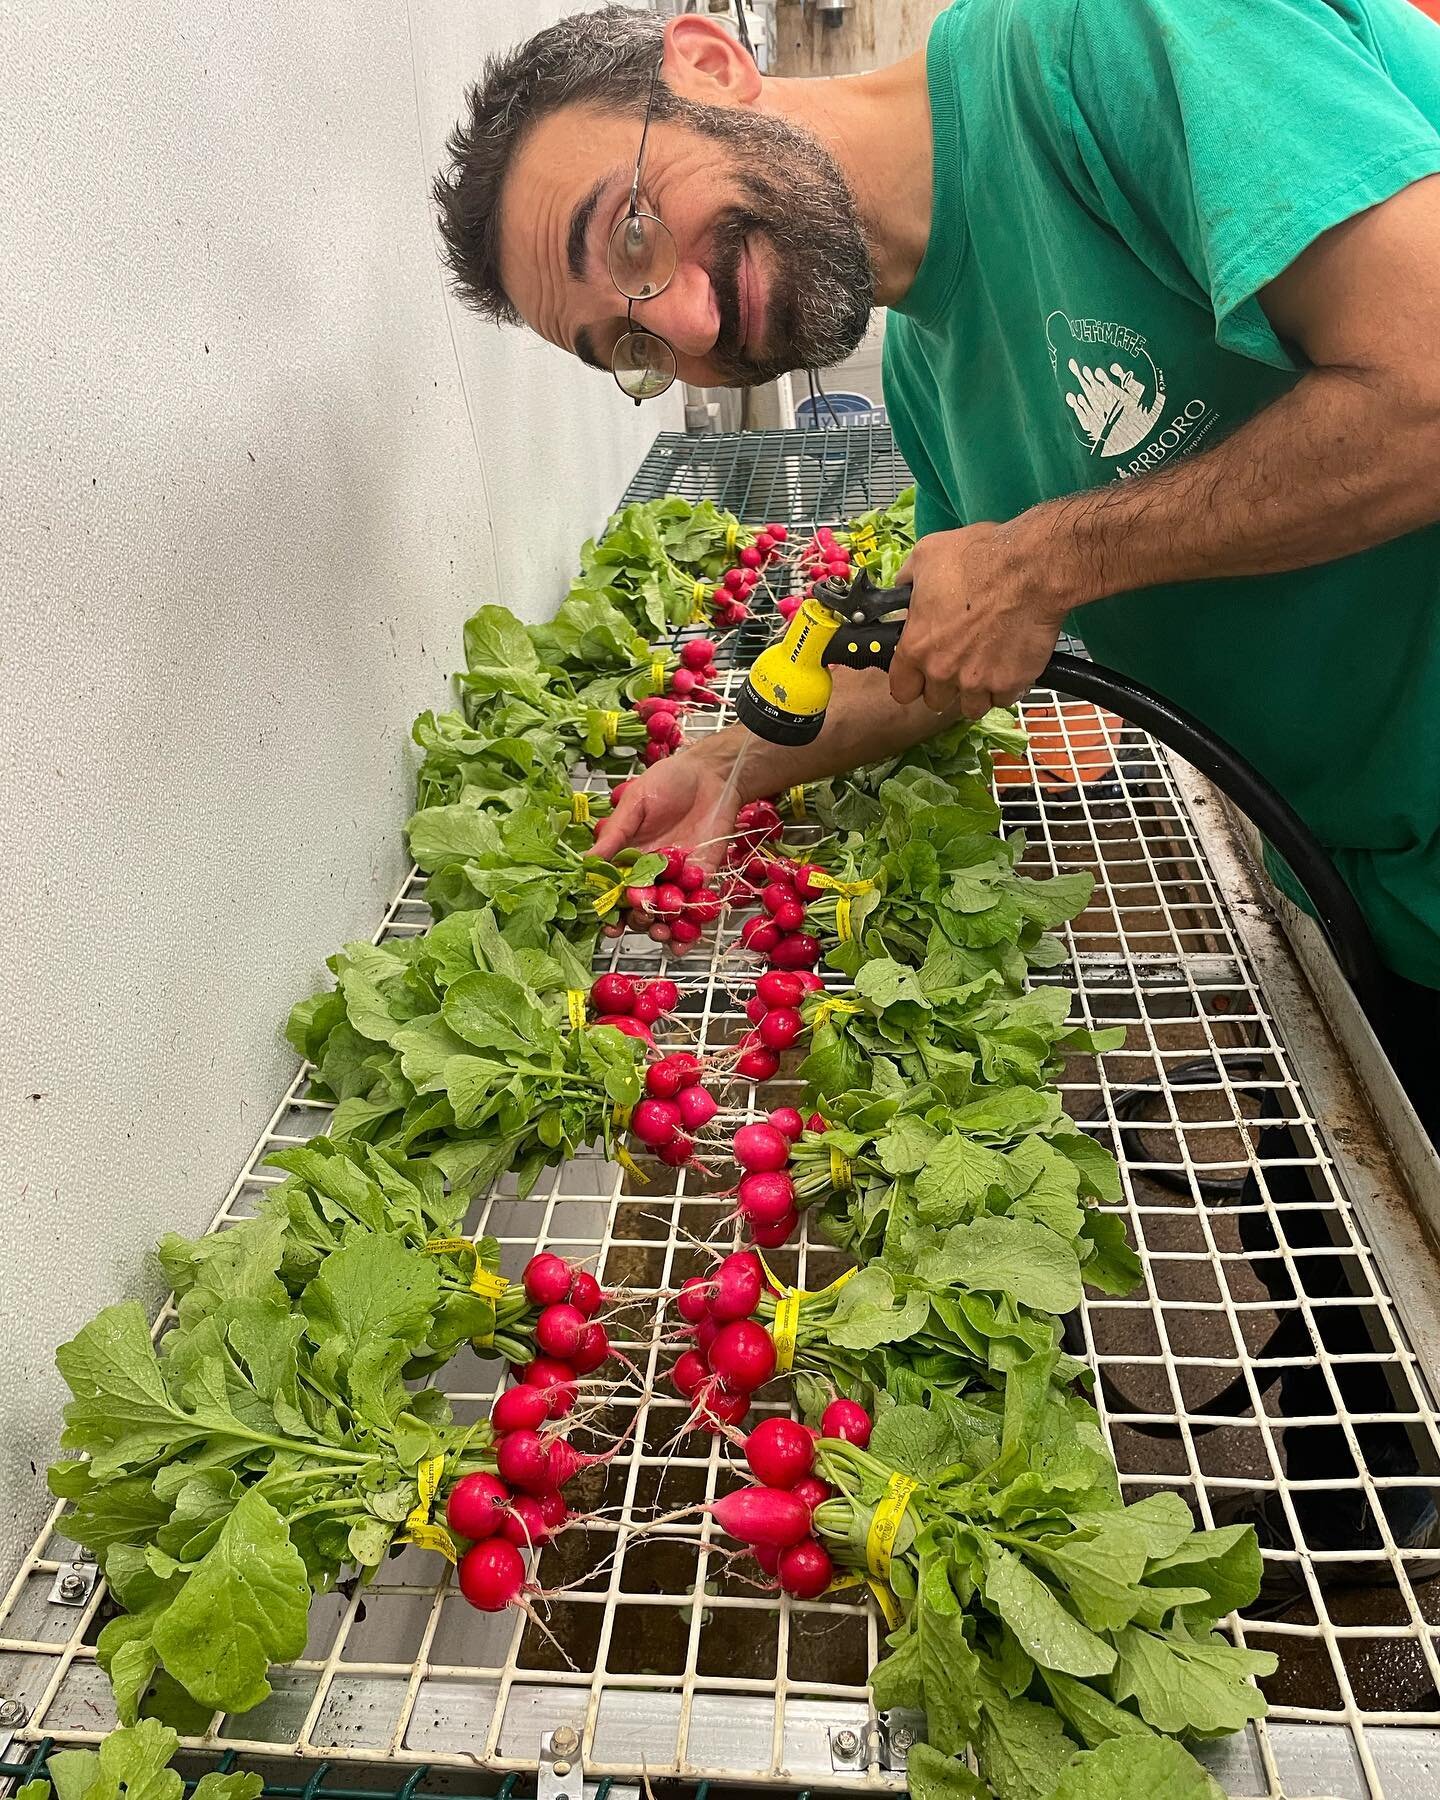 Excited for Tuesday&rsquo;s @brunswickfarmersmarket and for the opening of our farmstand for the week! Greens and radishes meet peppers and tomatoes in this most august of months.

#brunswickmaine #mainefarmersmarkets #organicveggies #maineorganic